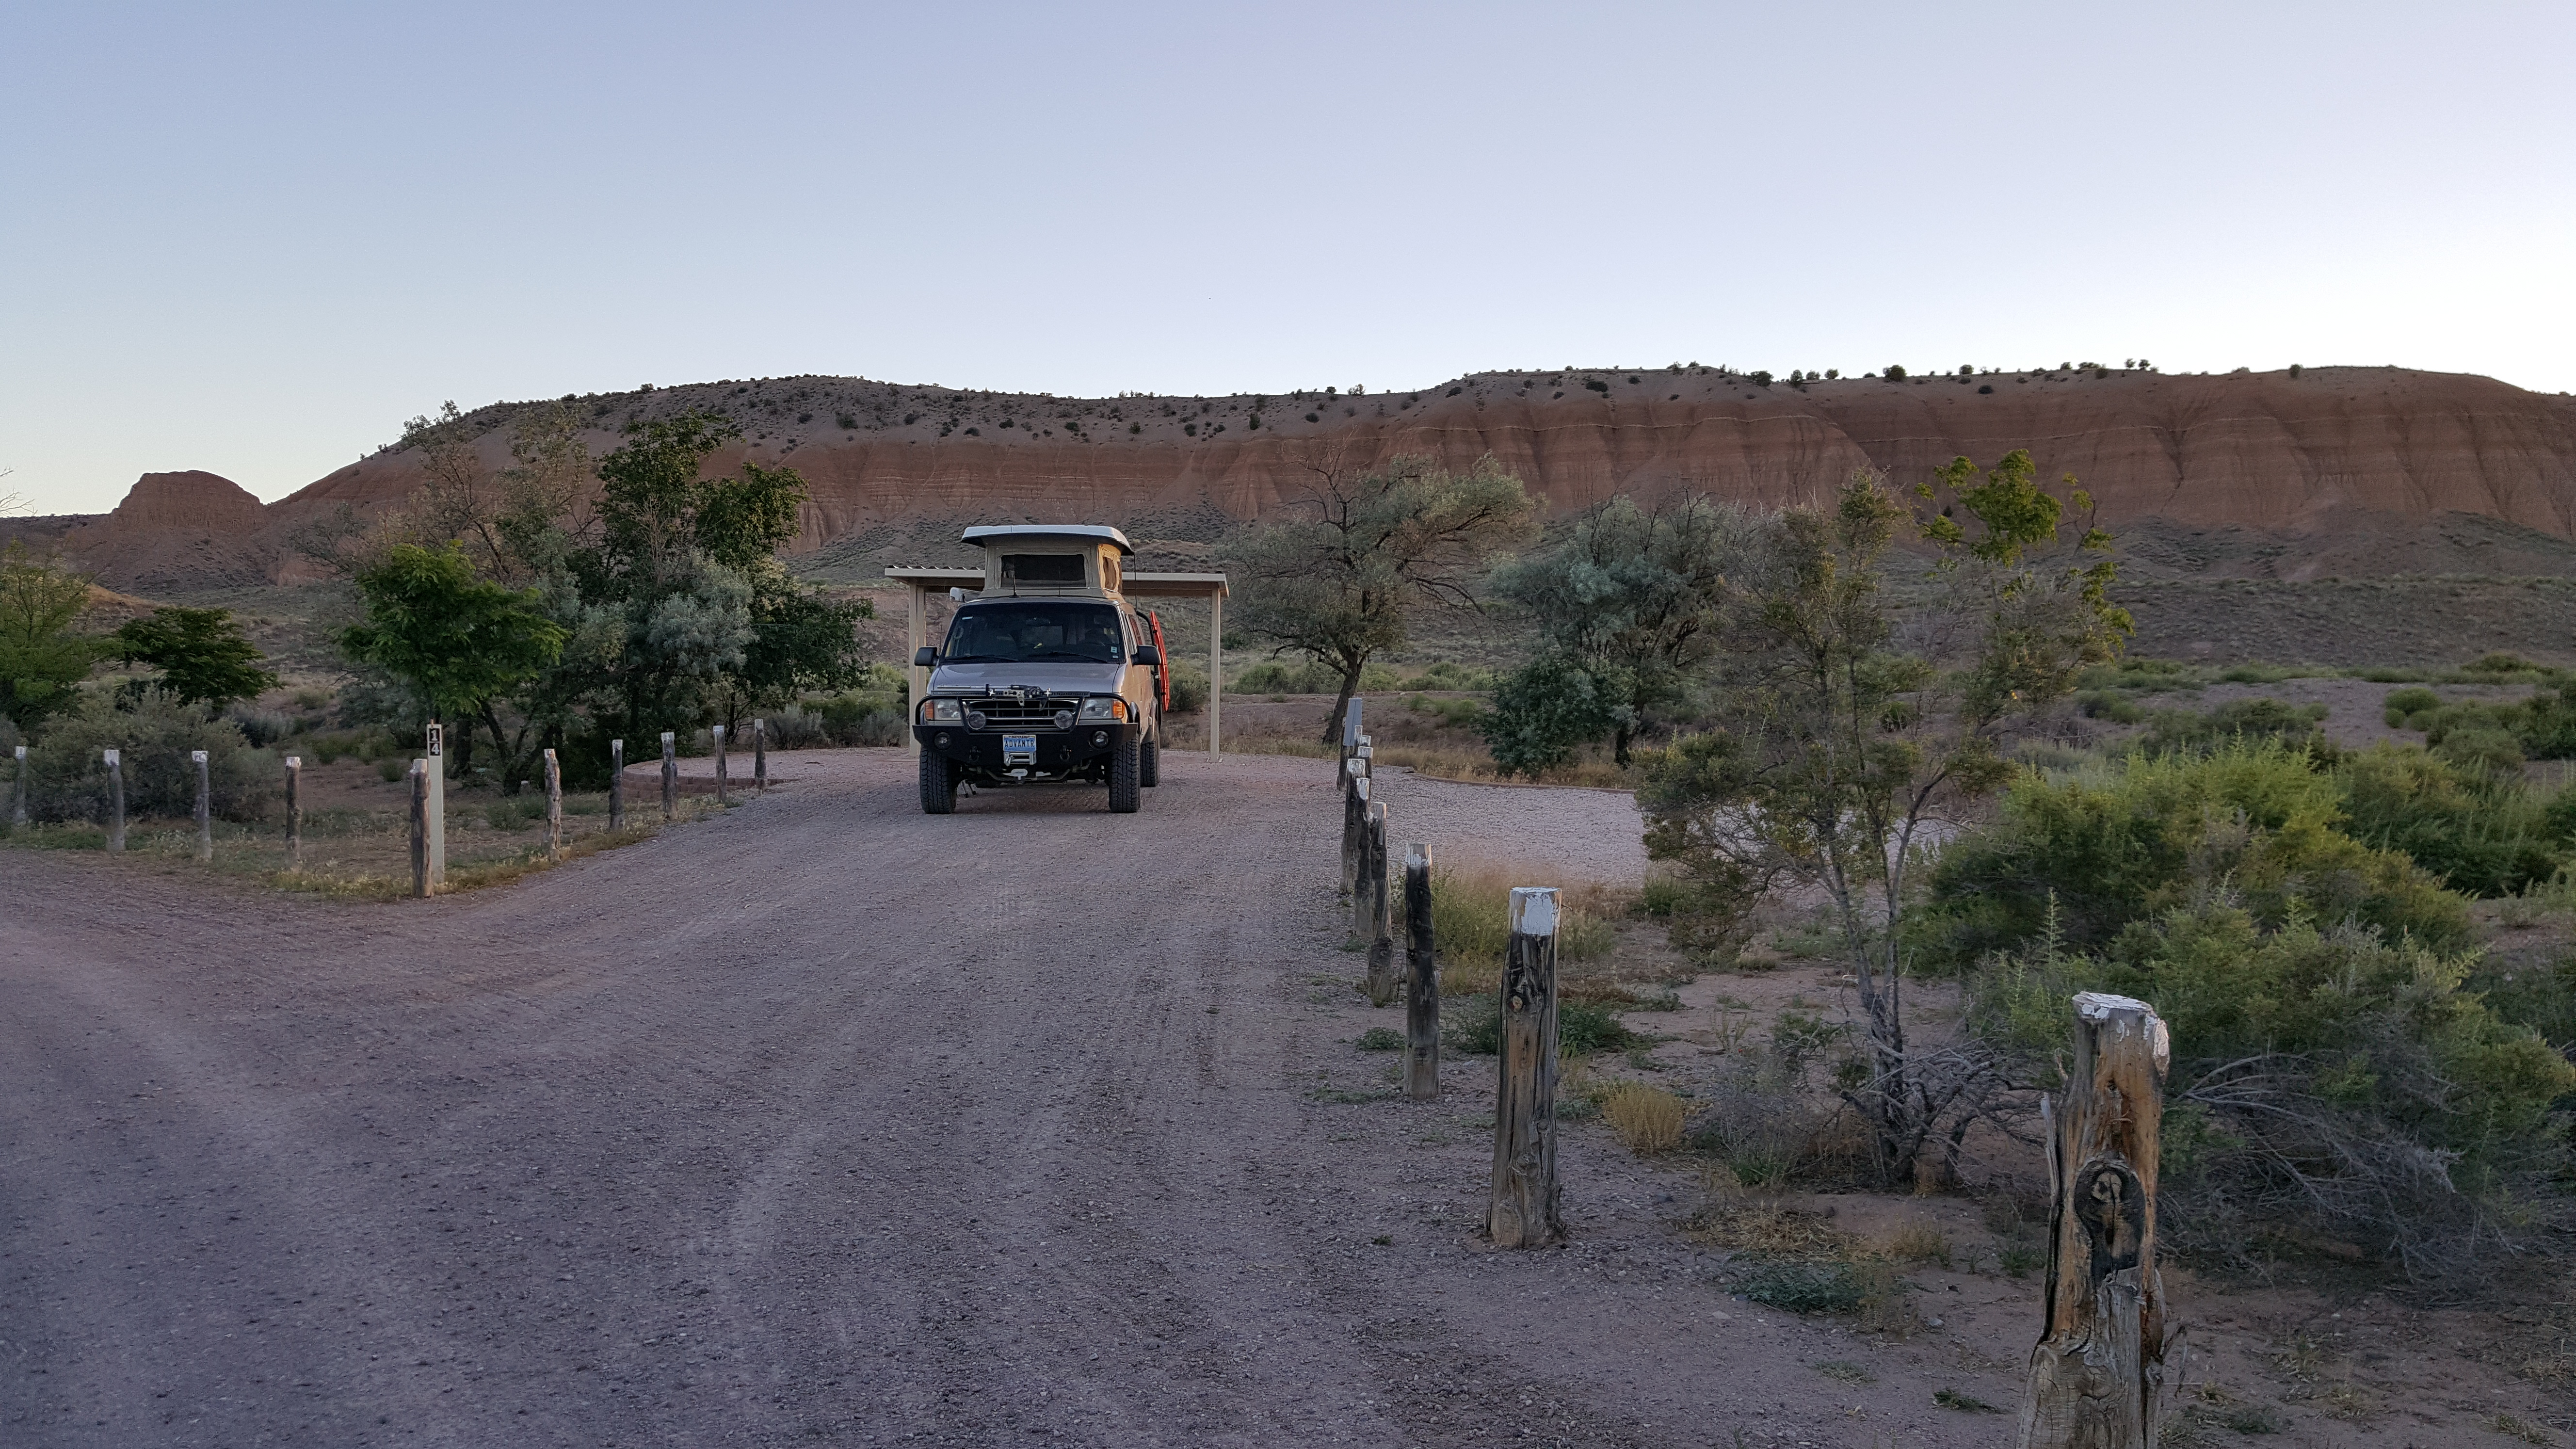 After three days I decided I needed a shower so I camped overnight at Cathedral Gorge State Park near Panaca, Nevada. The showers were hot, but so was the camping spot. Not a place to camp in the summer.